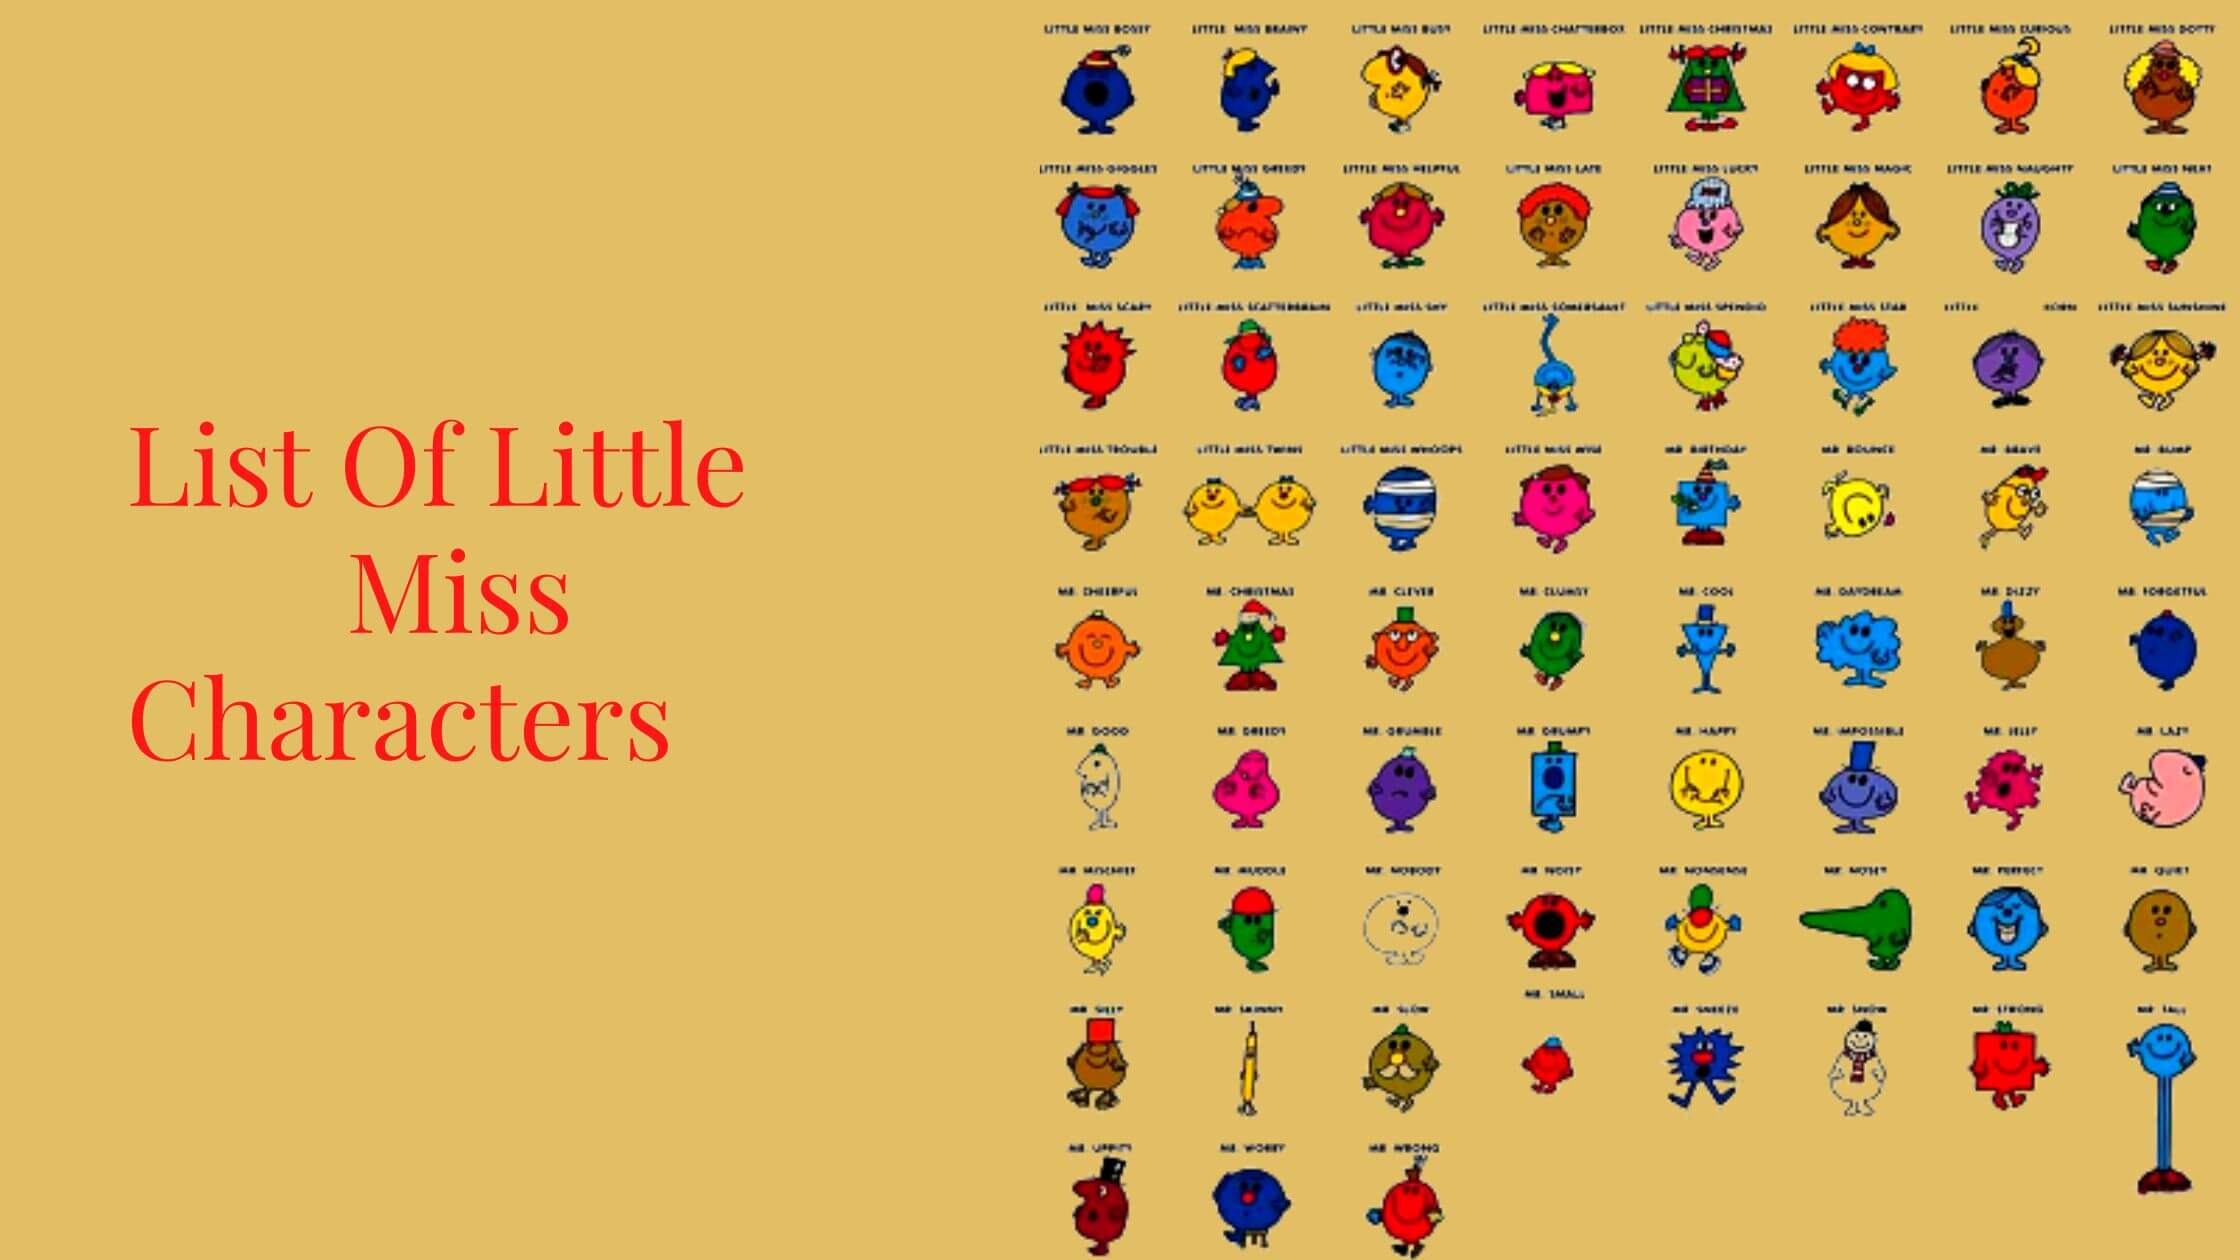 List Out The Little Miss Characters